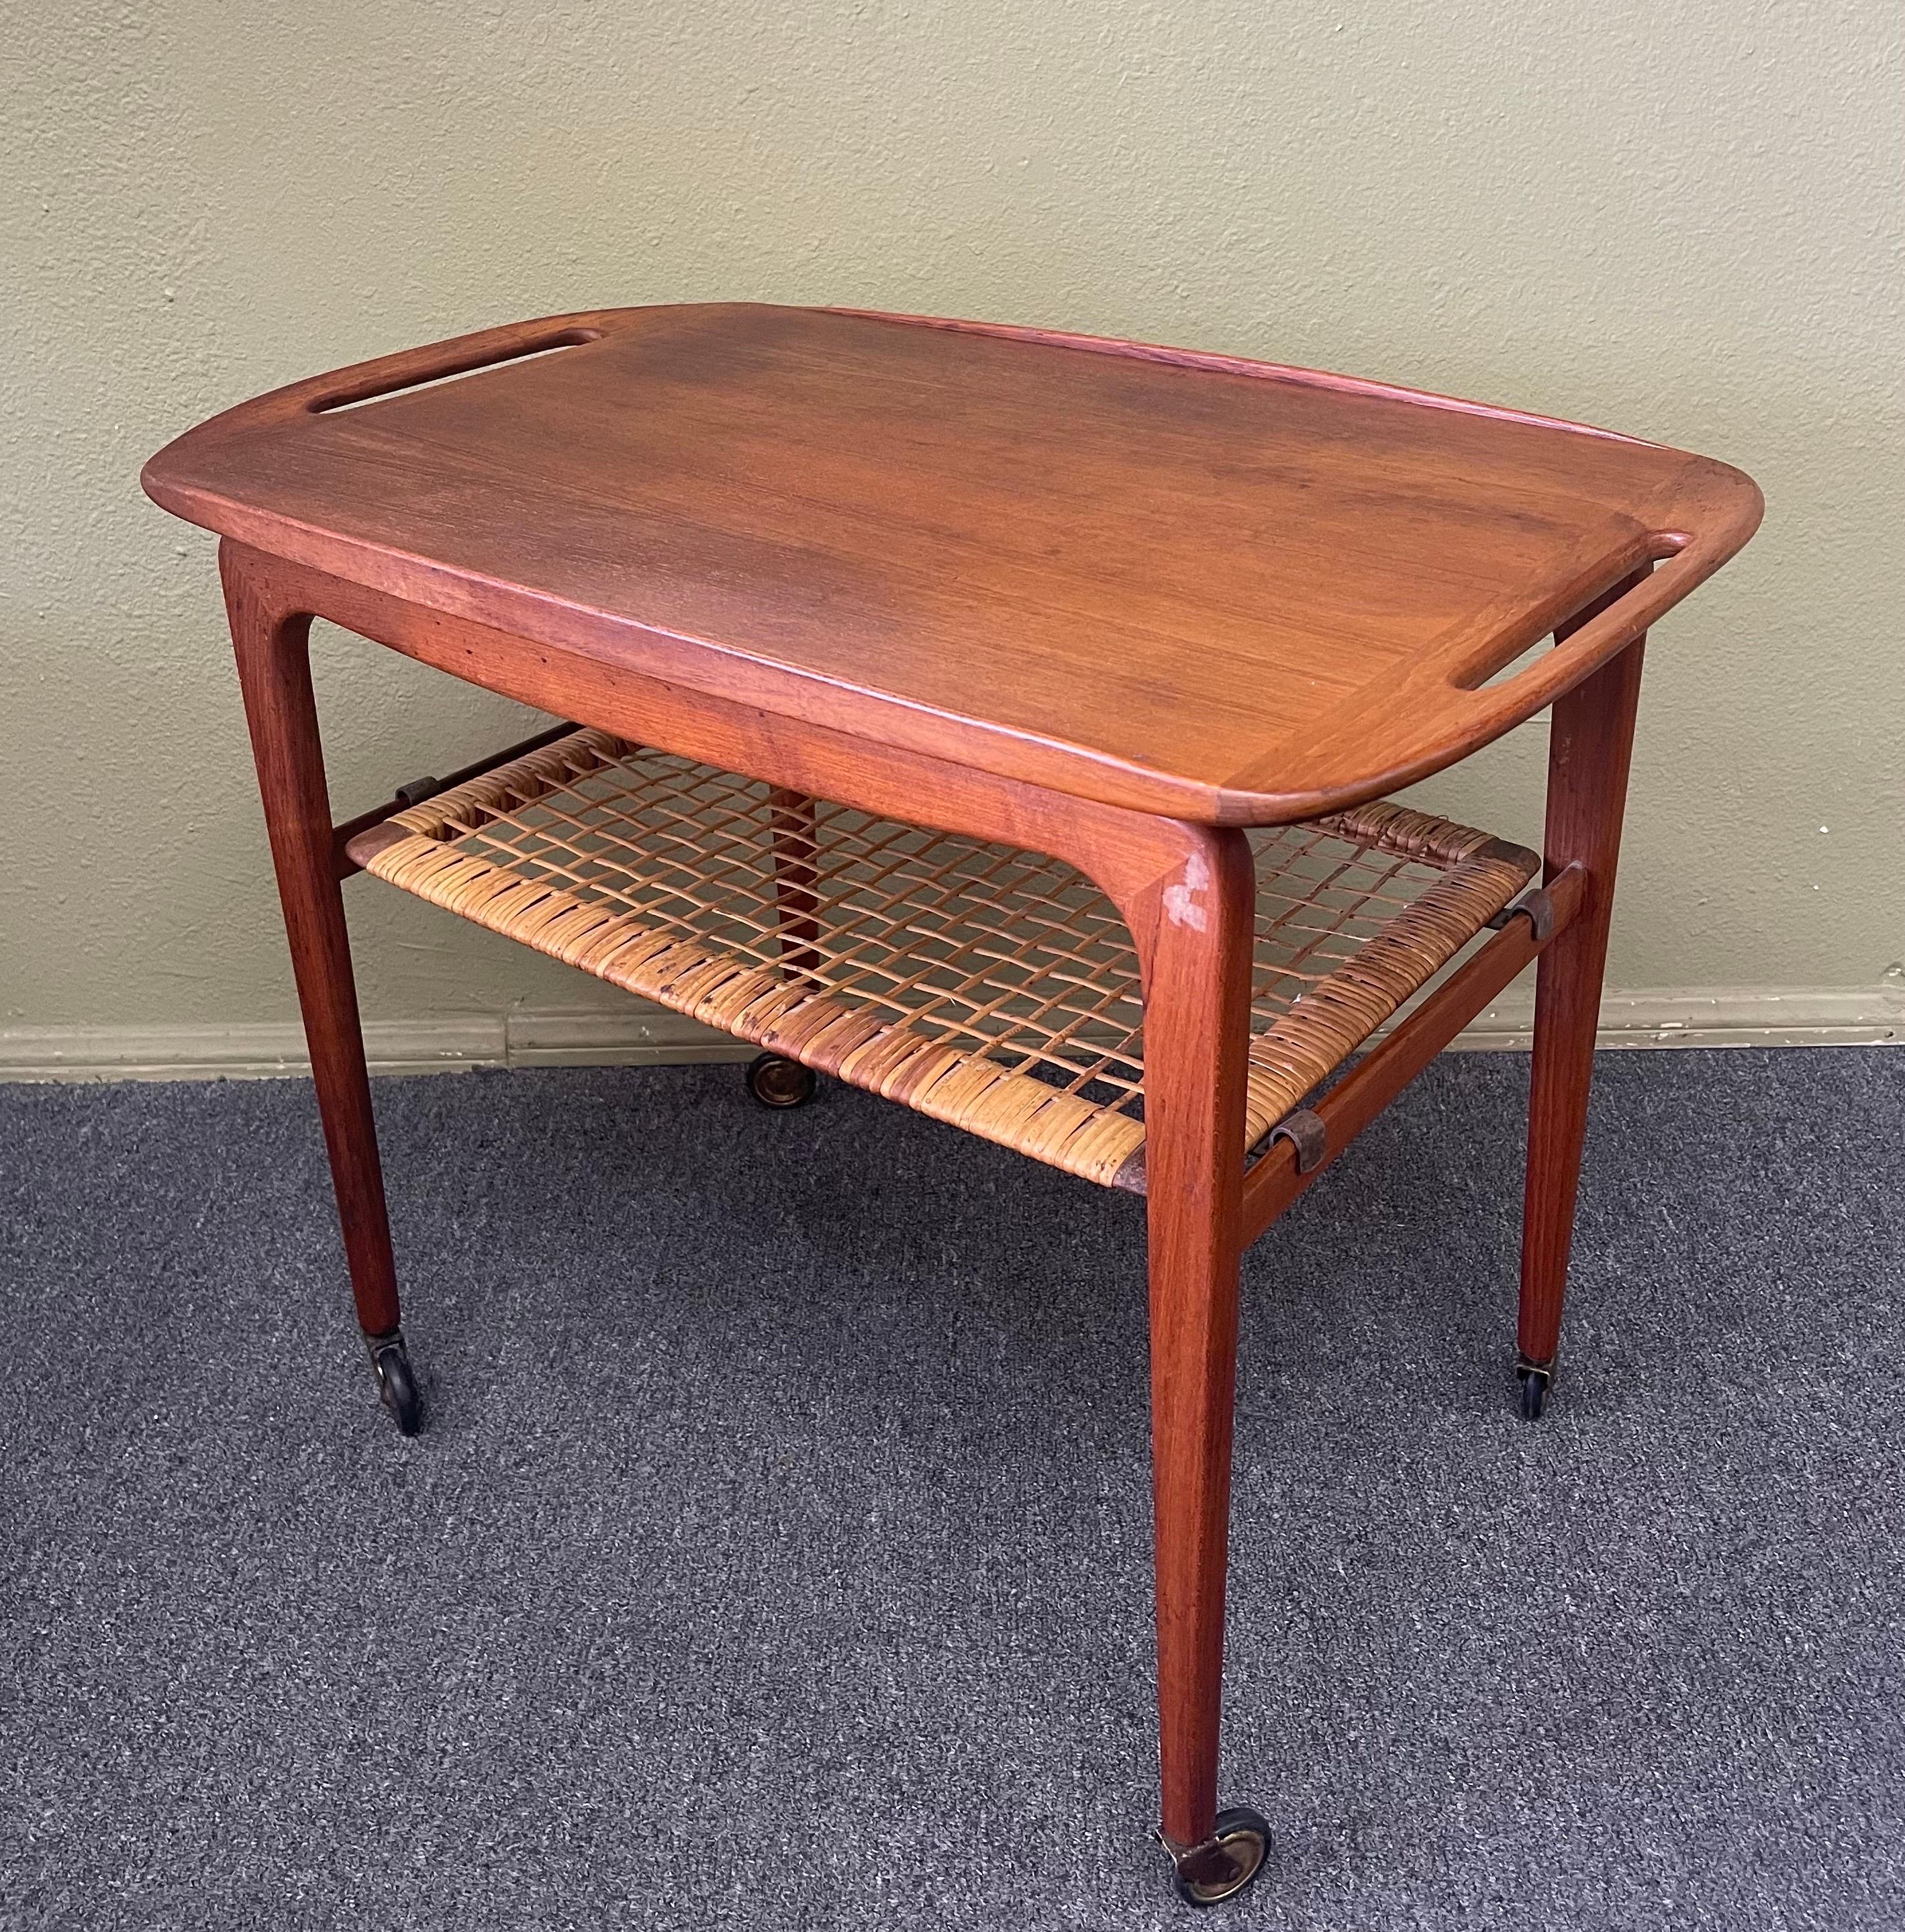 20th Century Danish Modern Teak Bar Cart with Removable Tray by Johannes Andersen / Silkeborg For Sale